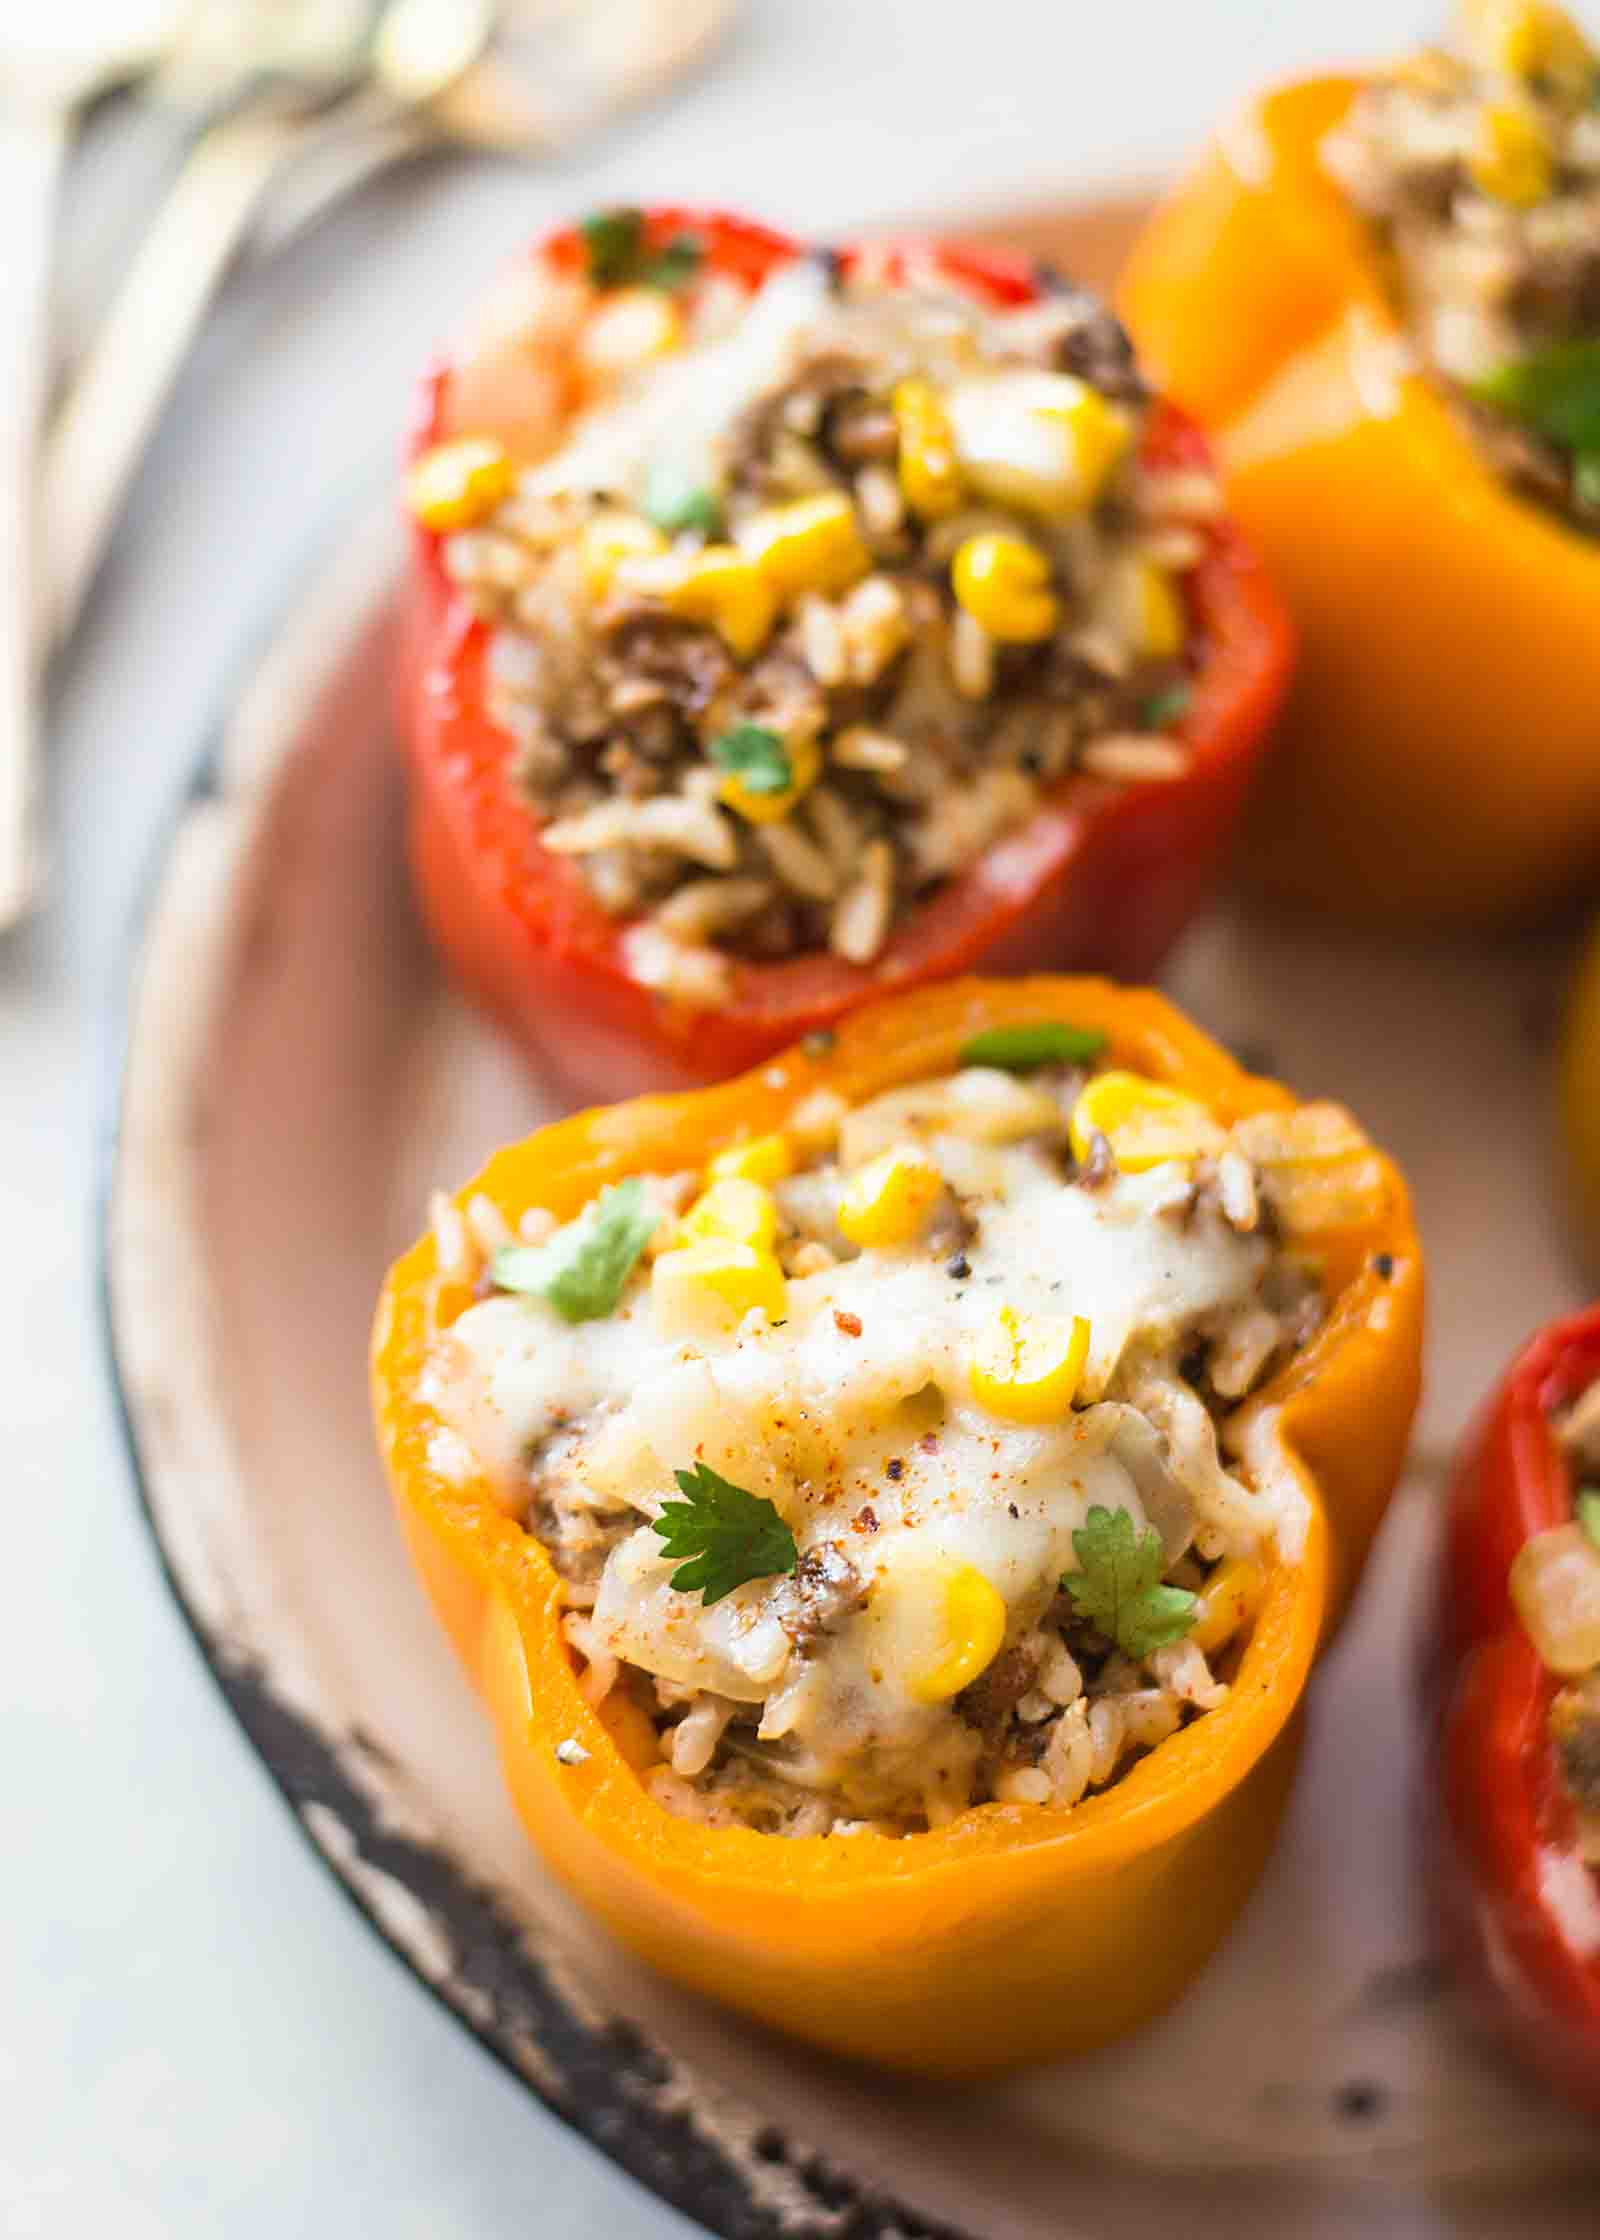 Slow Cooker Stuffed Bell Peppers
 Slow Cooker Cajun Spiced Stuffed Peppers Recipe